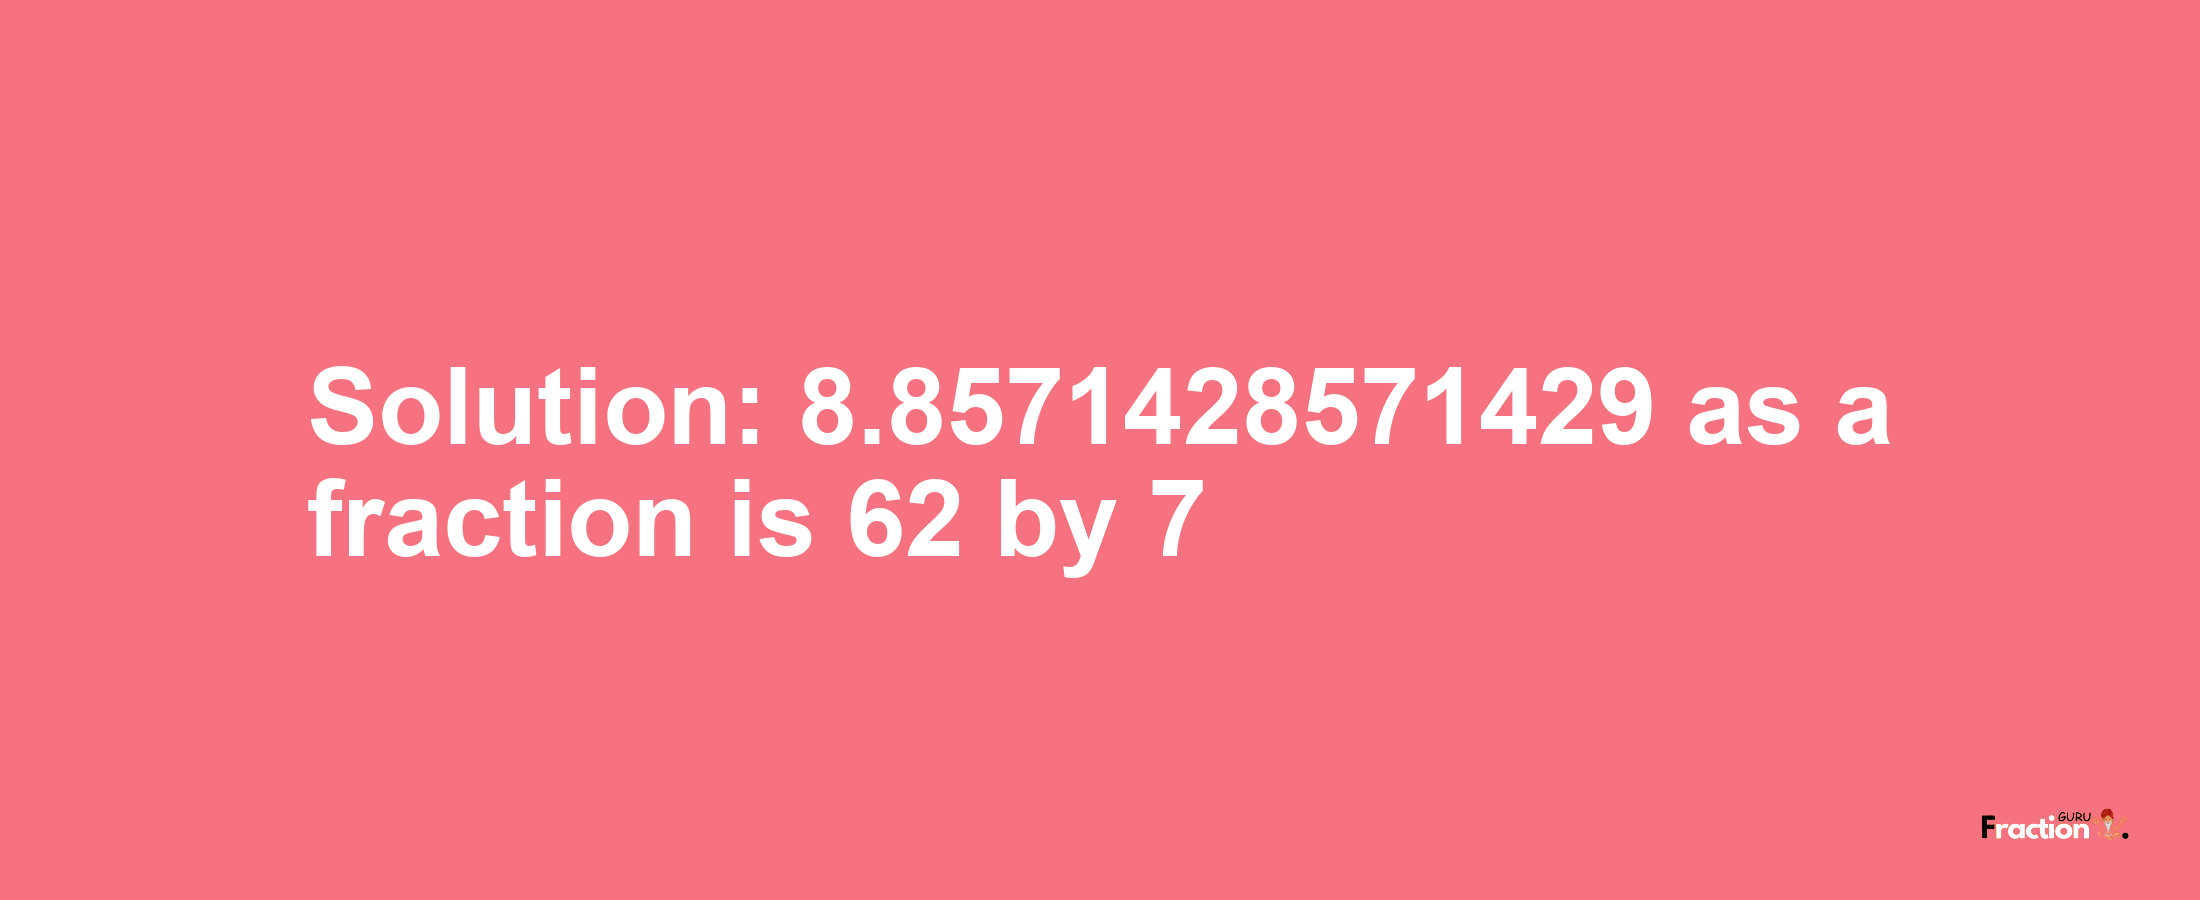 Solution:8.8571428571429 as a fraction is 62/7